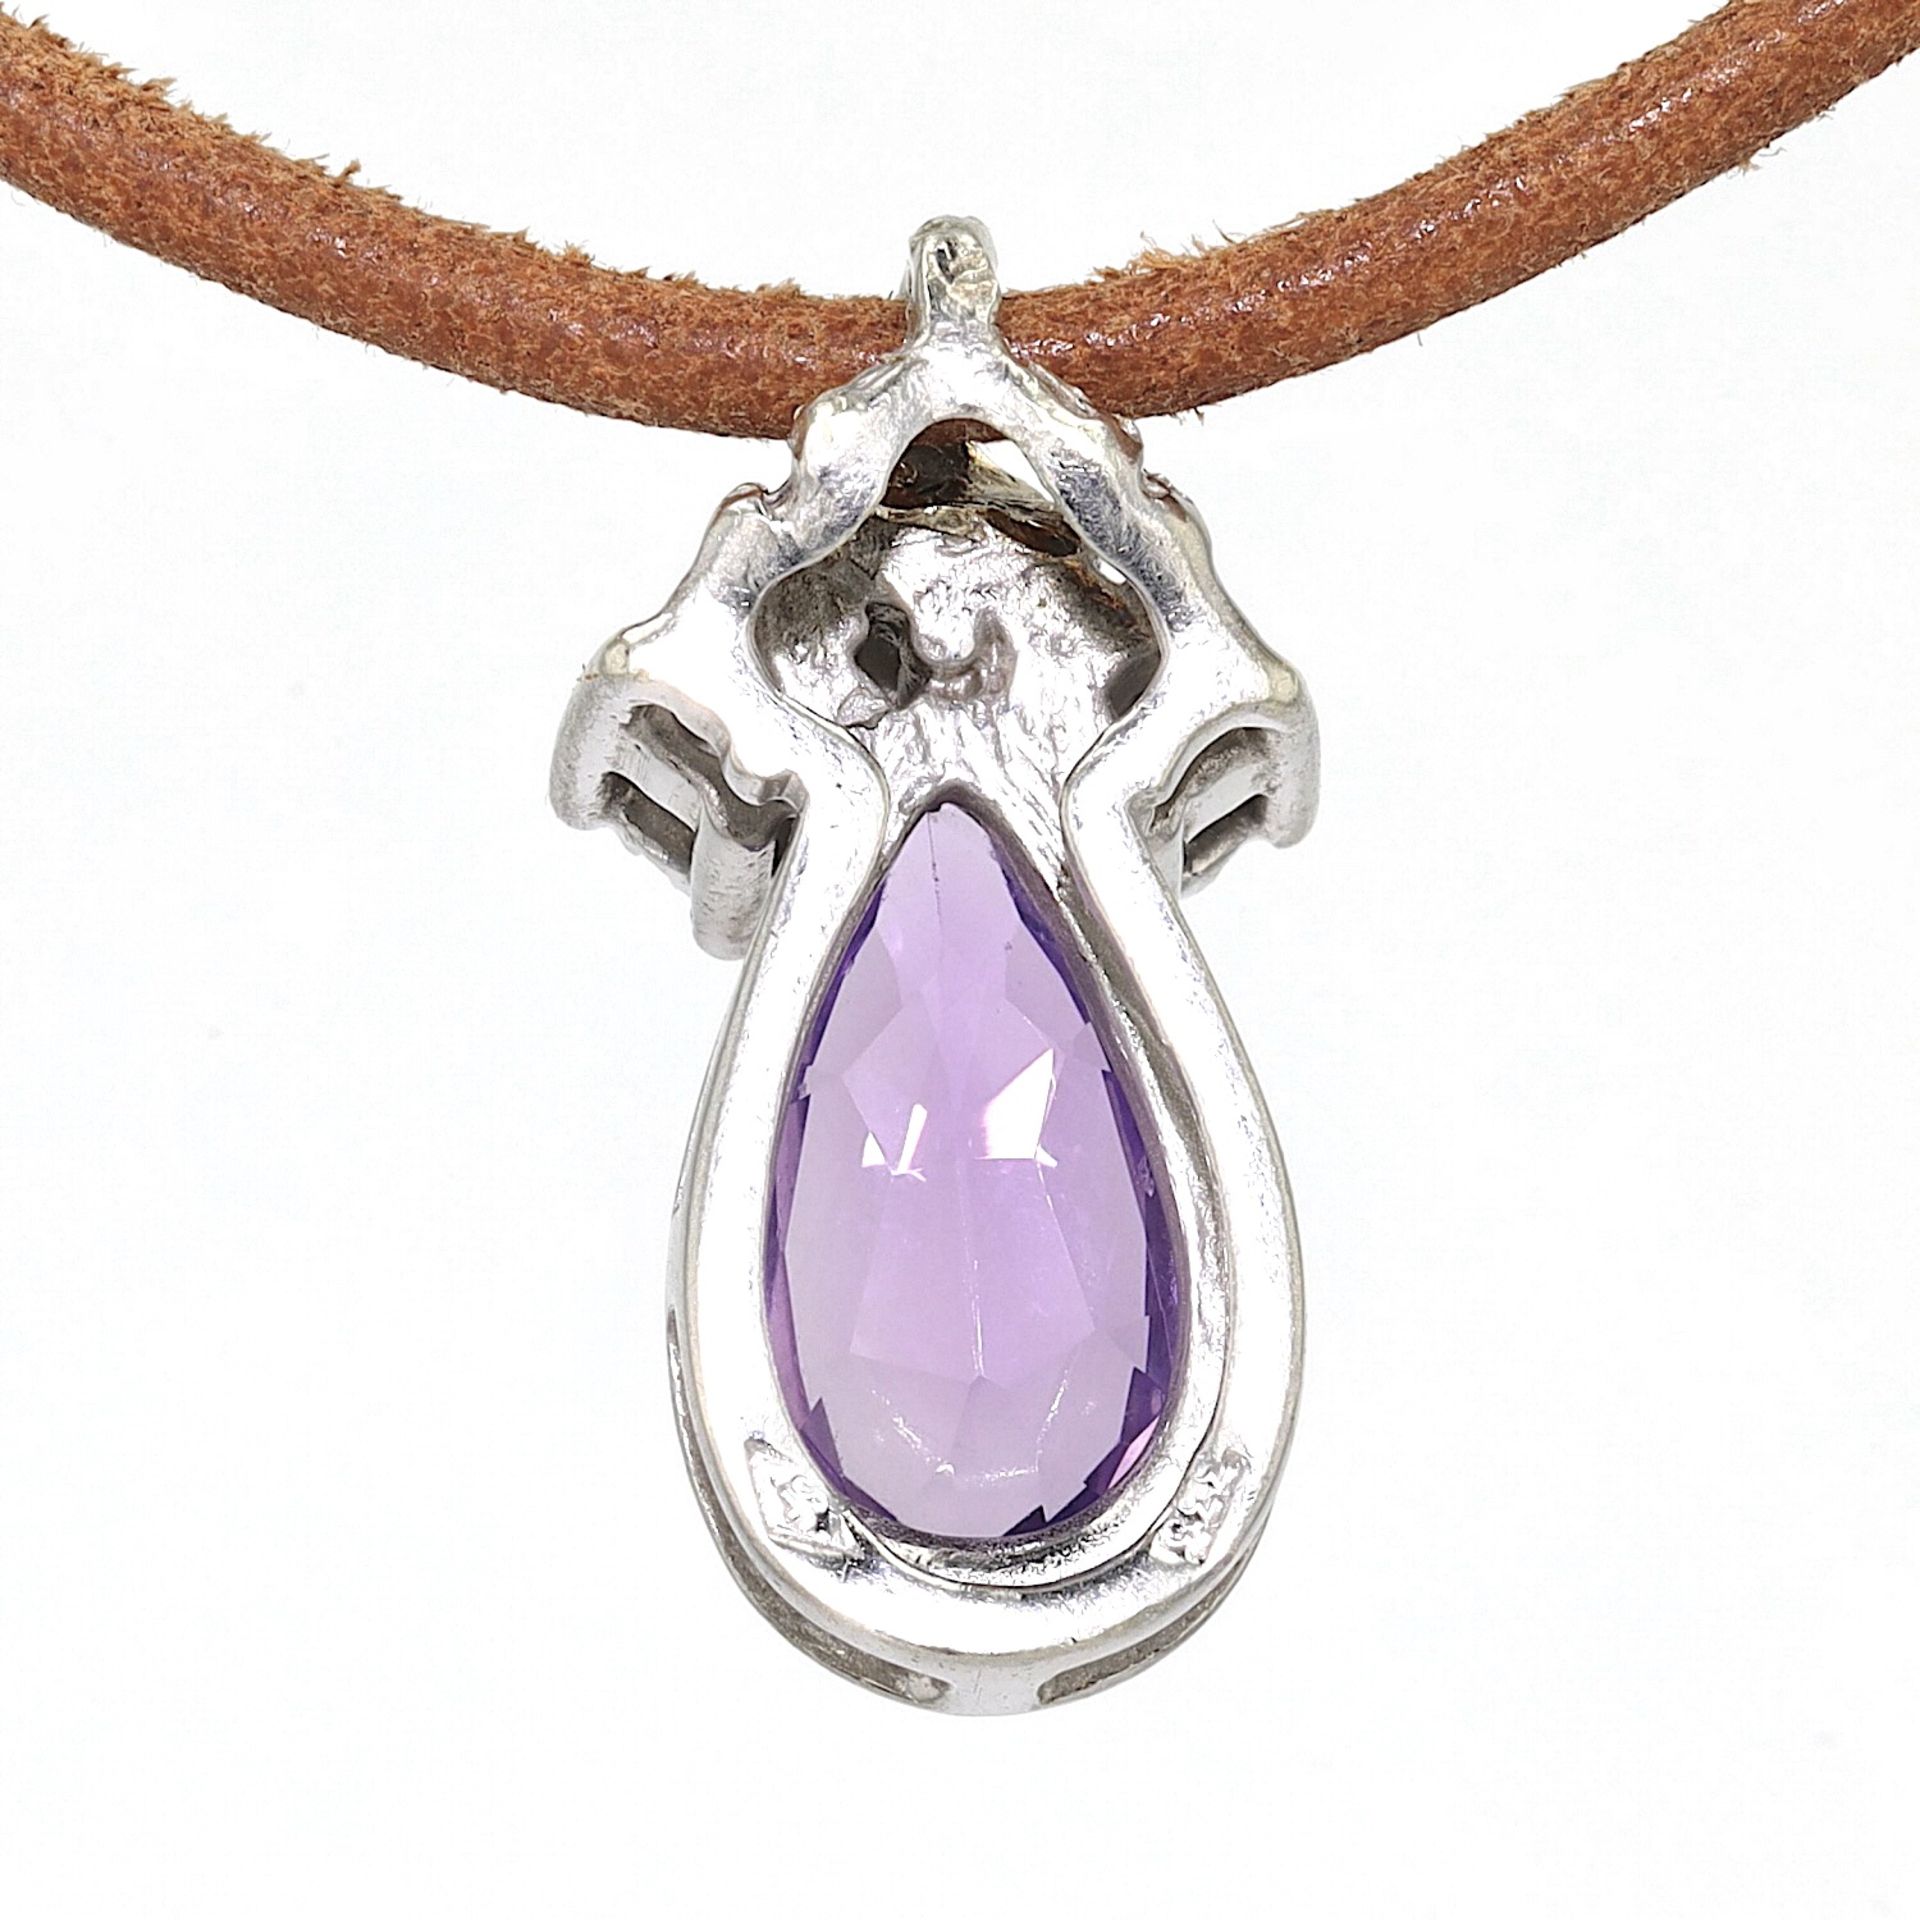 Pendant with amethyst and diamonds - Image 4 of 4